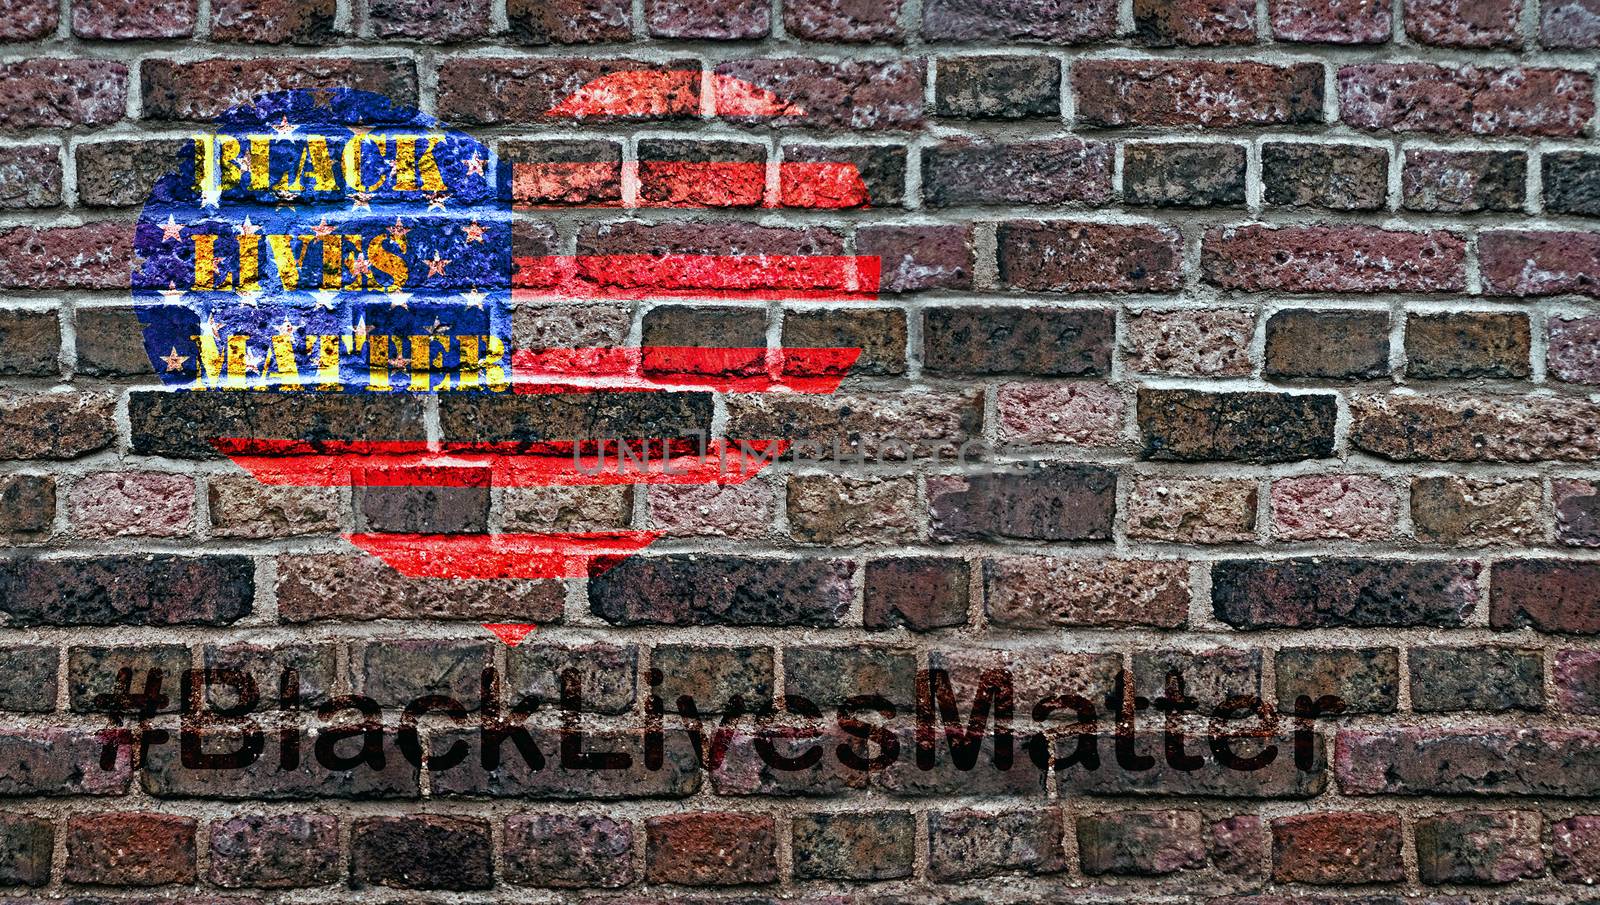 Black Lives Matter hashtag African-American people Protest against Black racism stencil heart United States of America United States Flag of the USA old weathered stained red brick wall background